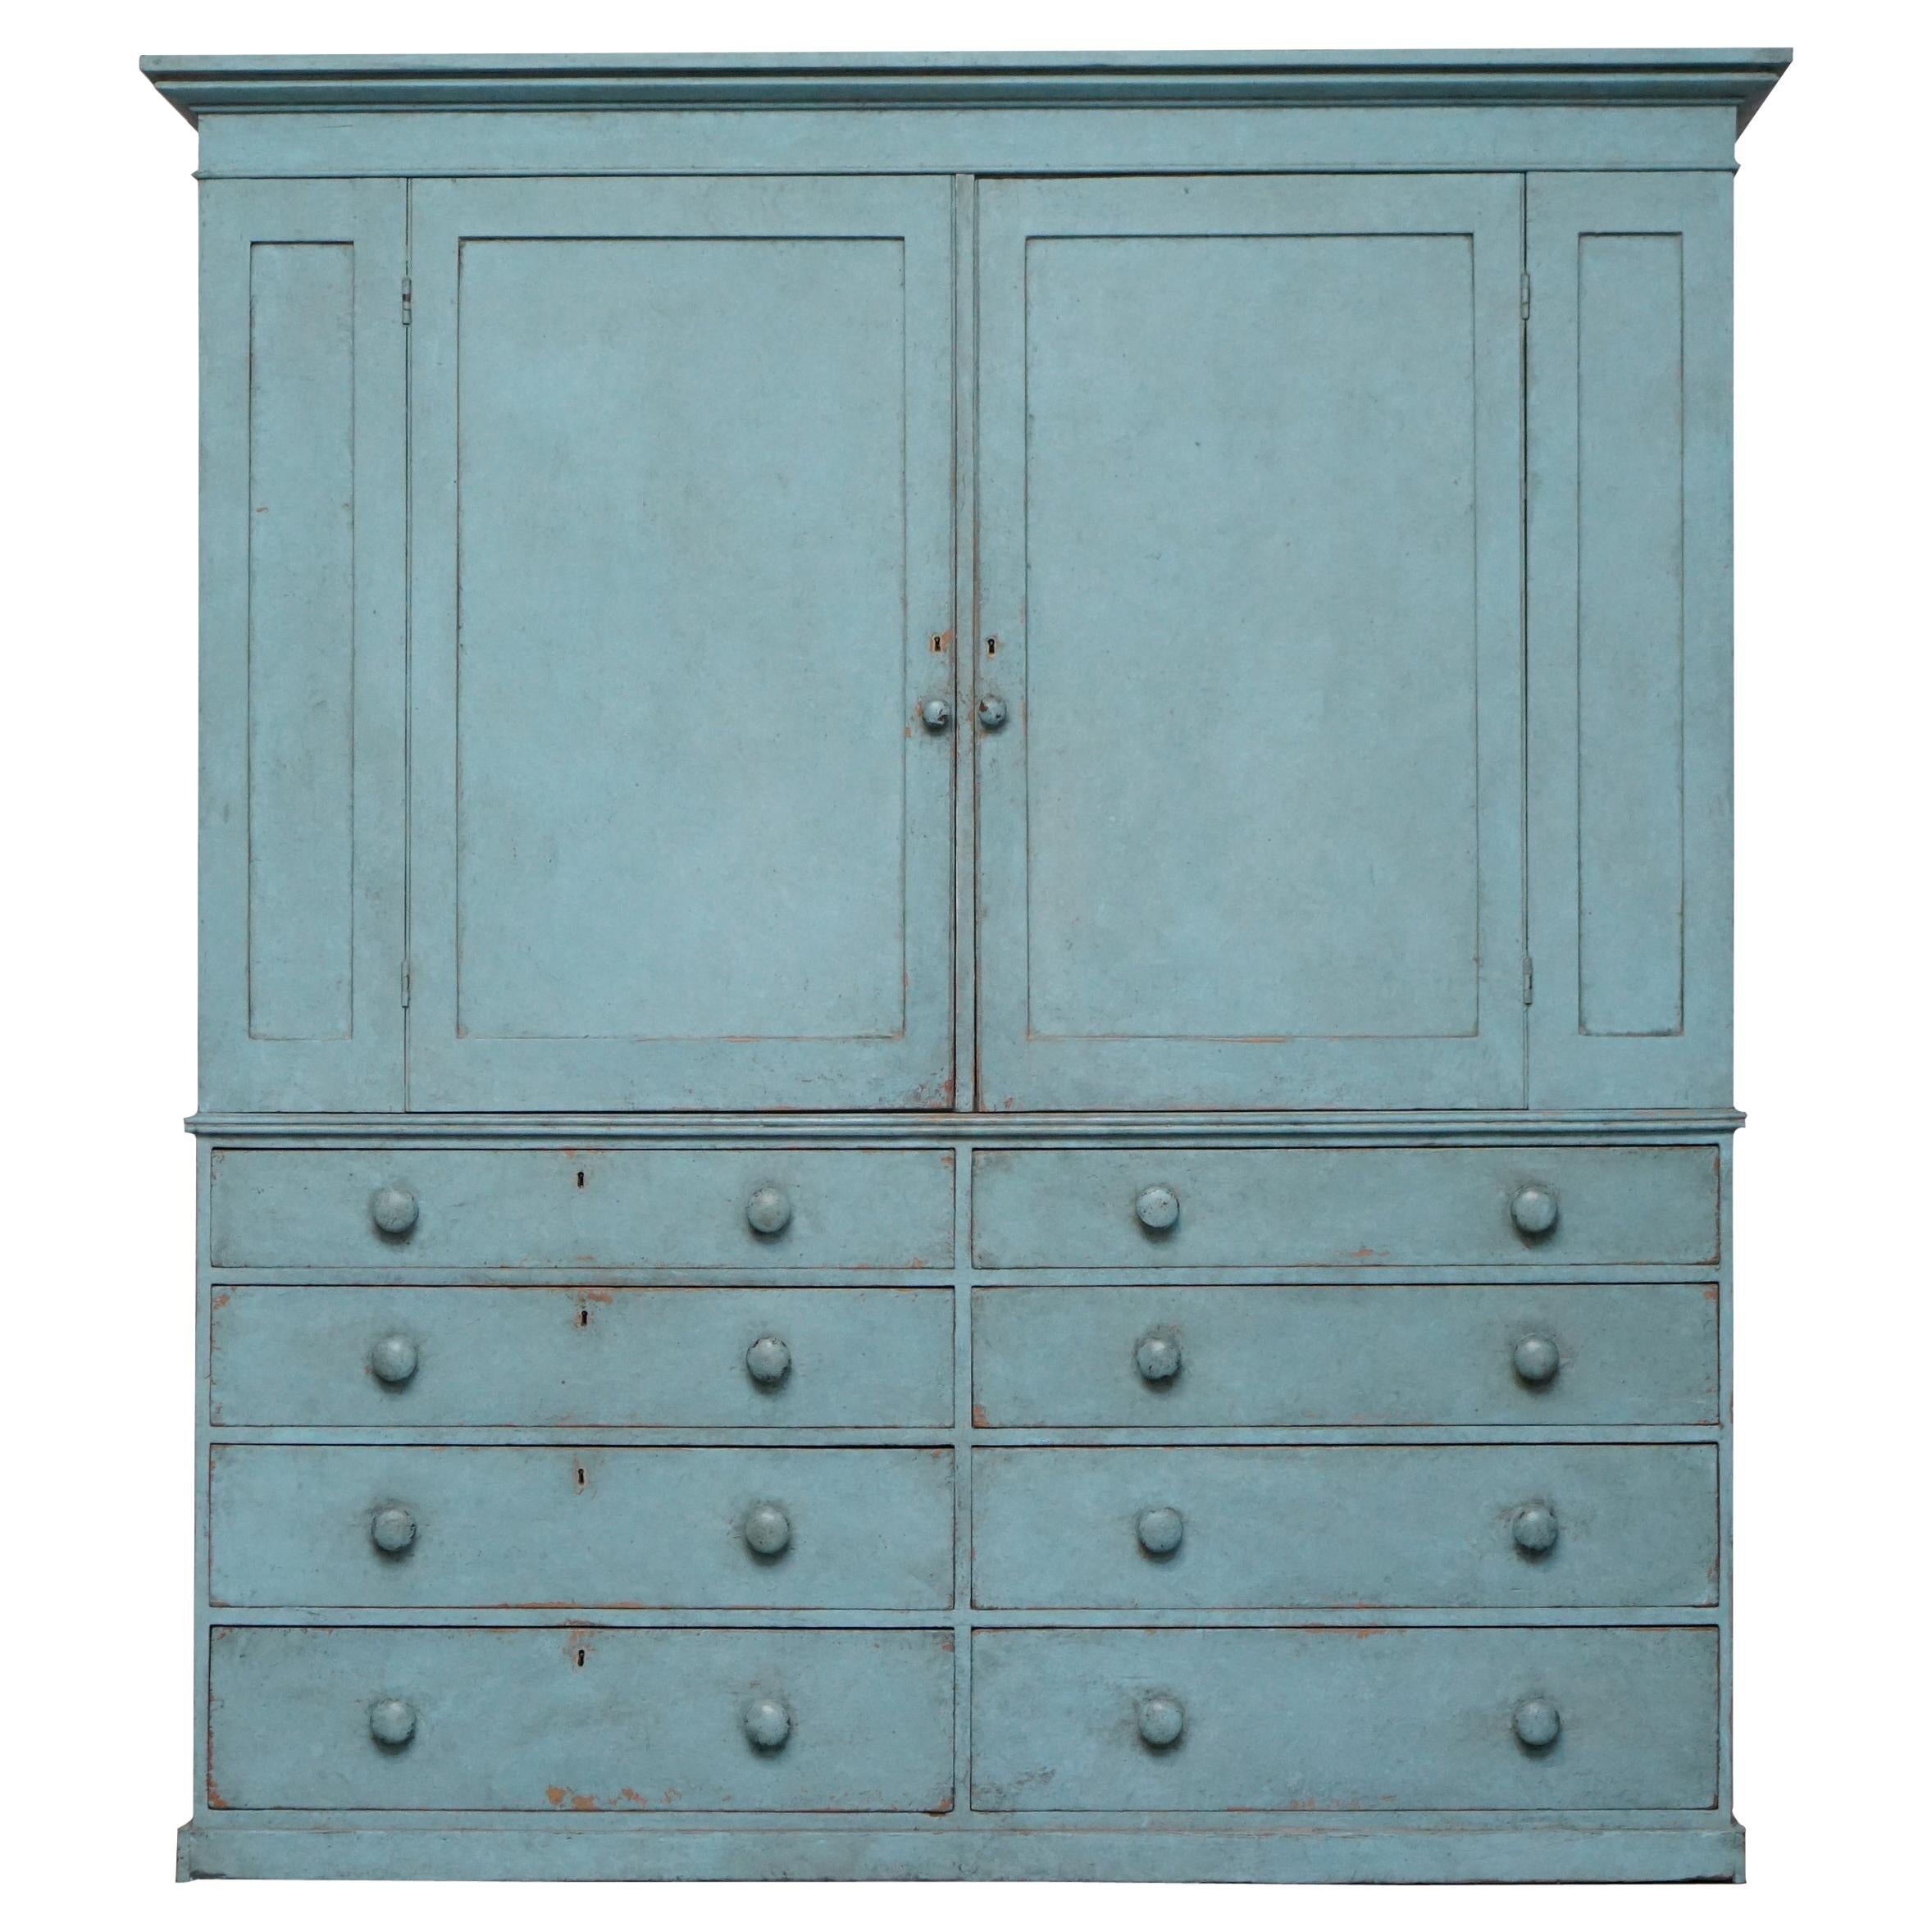 Victorian Blue Painted Pine circa 1860 Housekeepers Cupboard Chest of Drawers